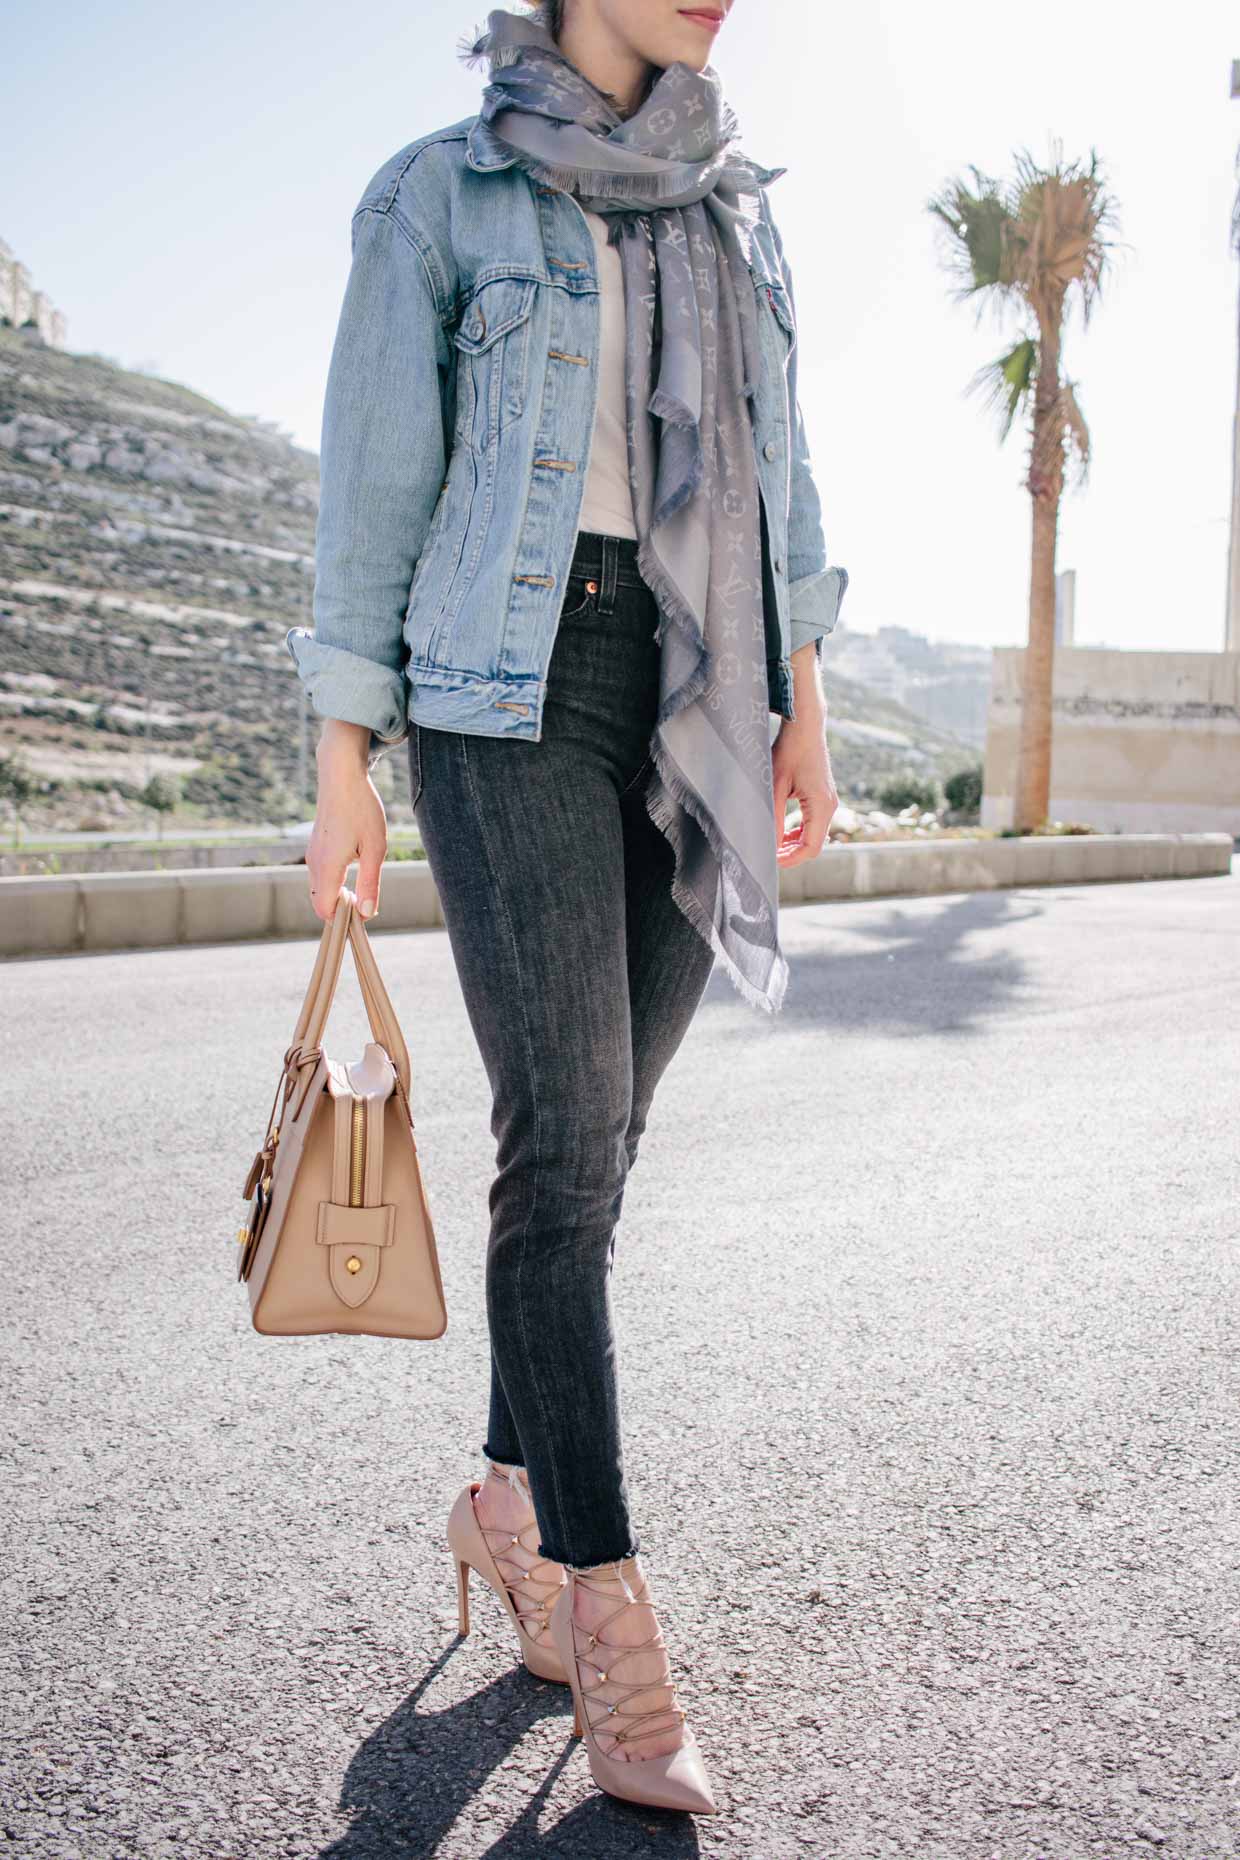 scarf, tumblr, knitted scarf, top, nude top, jeans, blue jeans, denim,  ripped jeans, lace up heels, high heels, bag, louis vuitton, louis vuitton  bag - Wheretoget